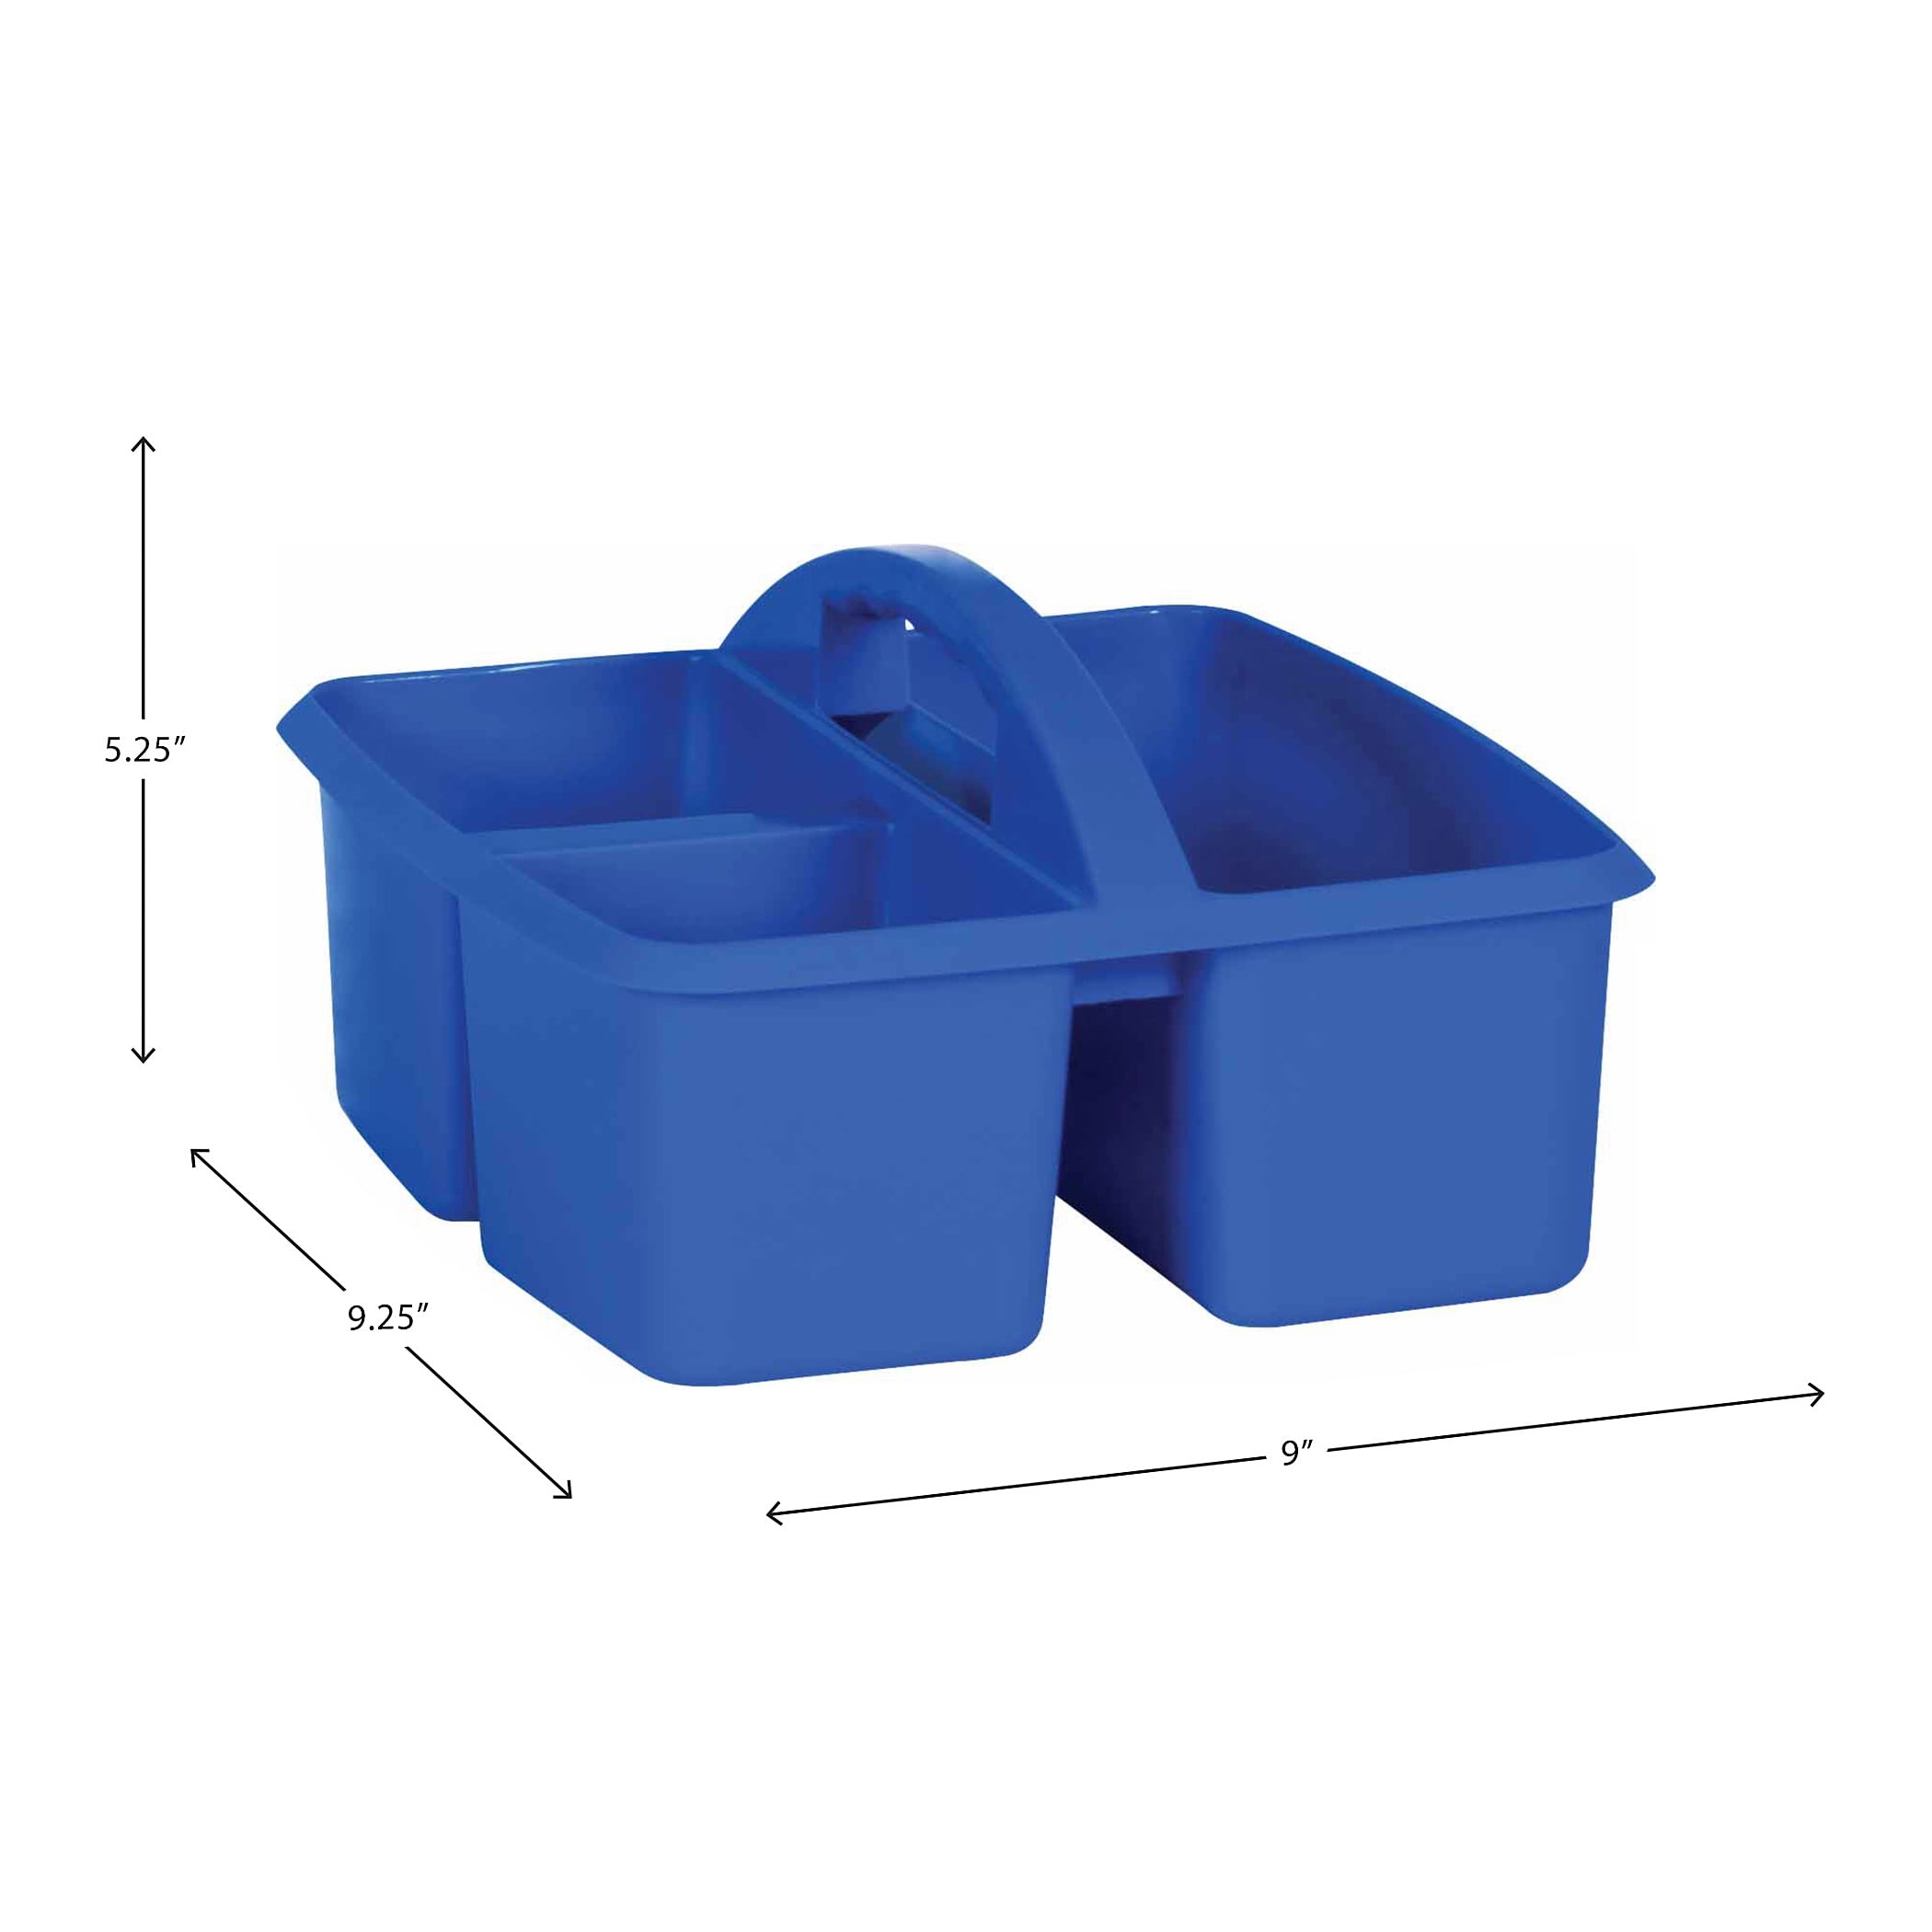 Teacher Created Resources Blue Portable Plastic Storage Caddy 6-Pack for  Classrooms, Kids Room, and Office Organization, 3 Compartment